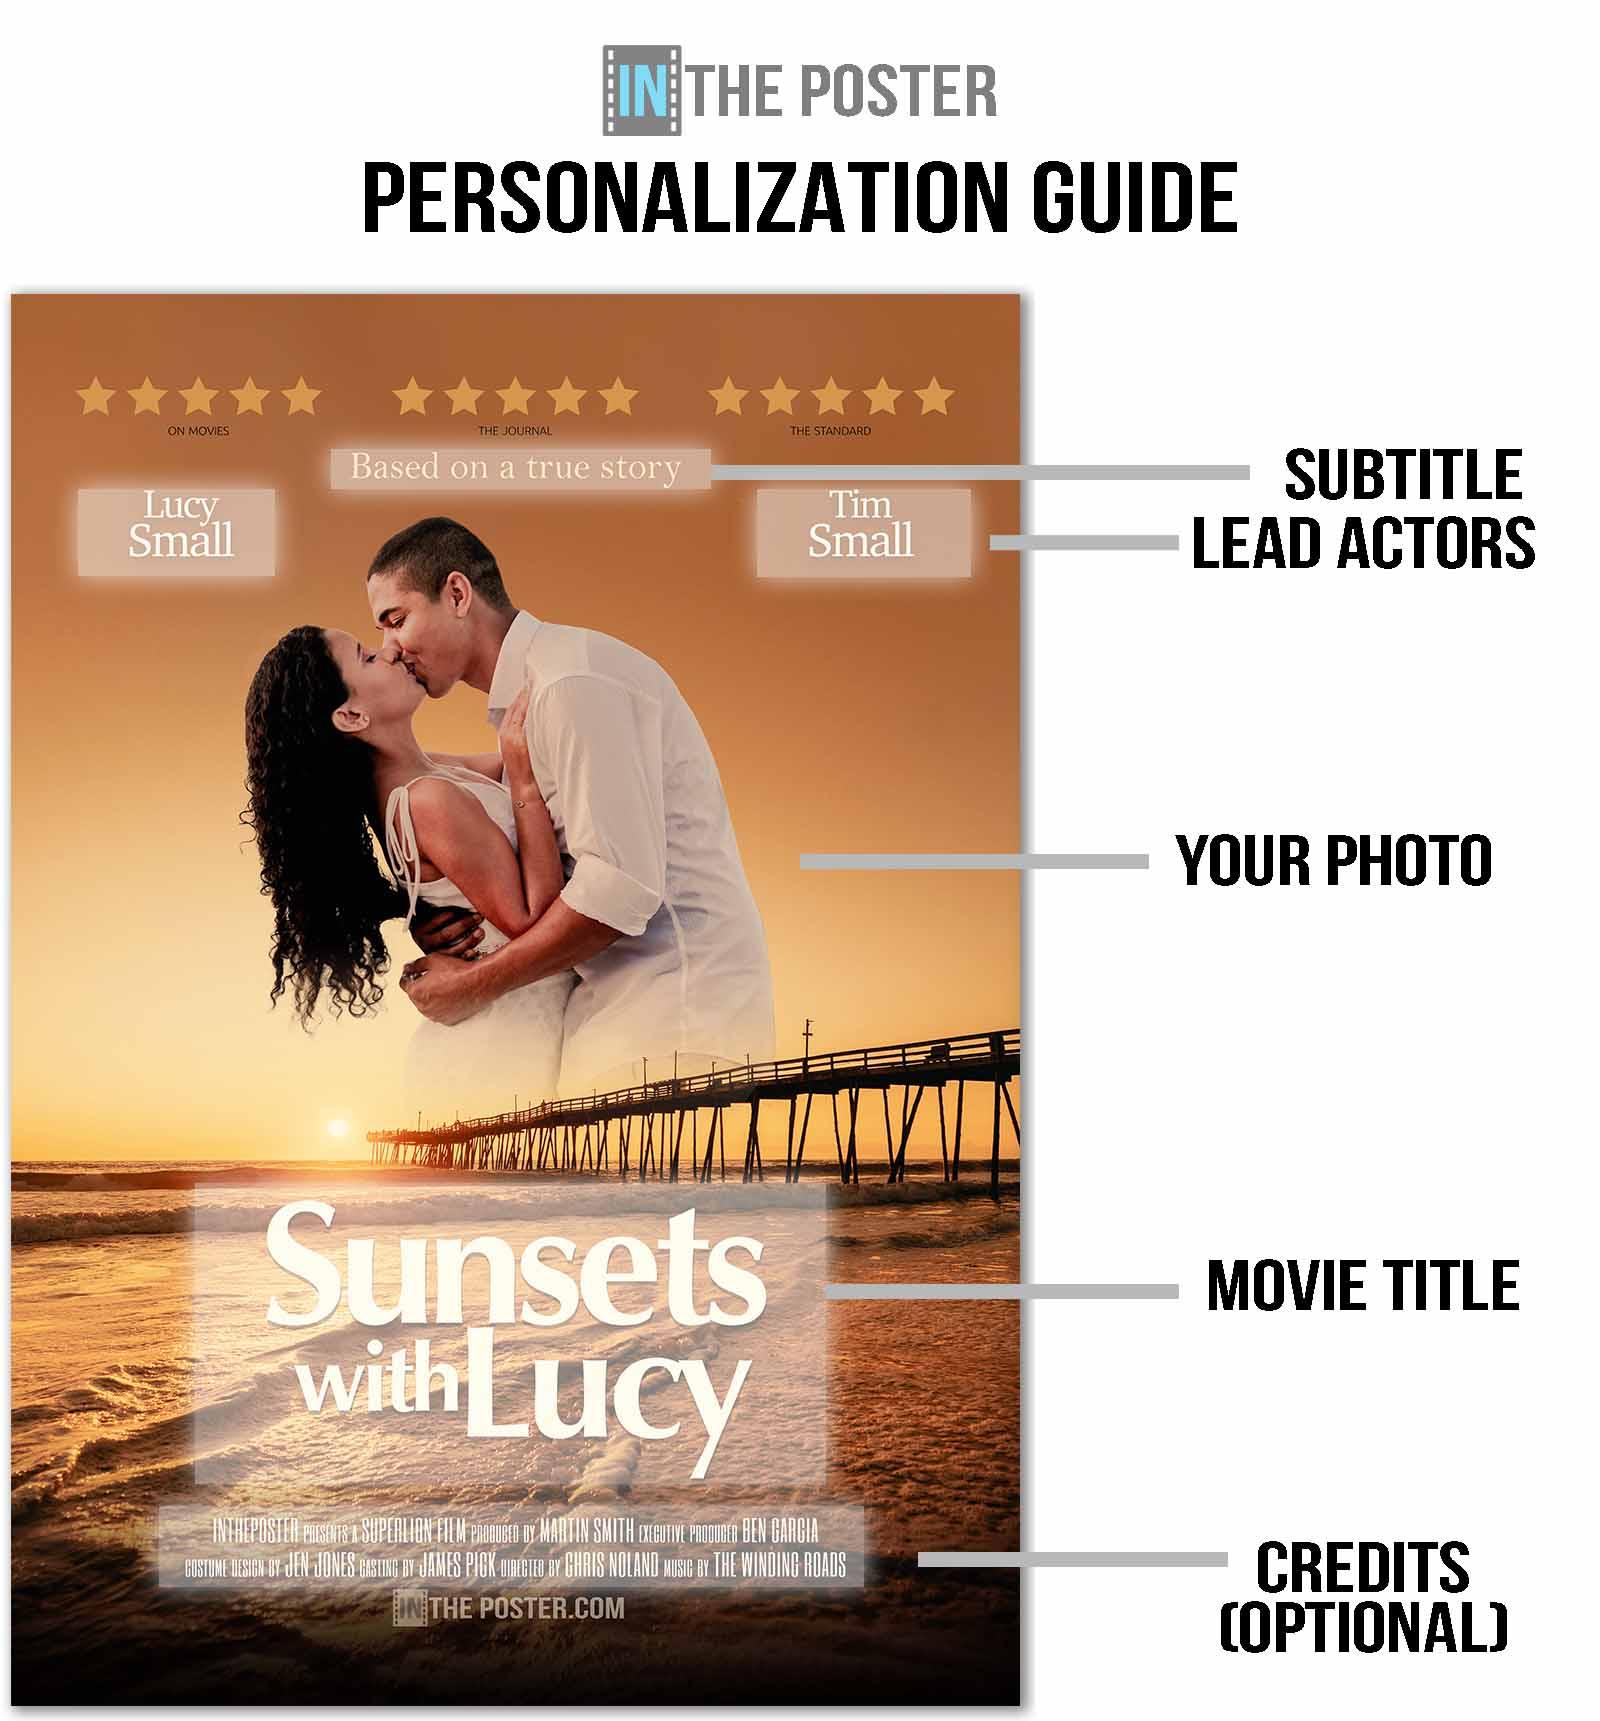 A film poster with a romantic sunset and a guide on how to add custom text and your own photo